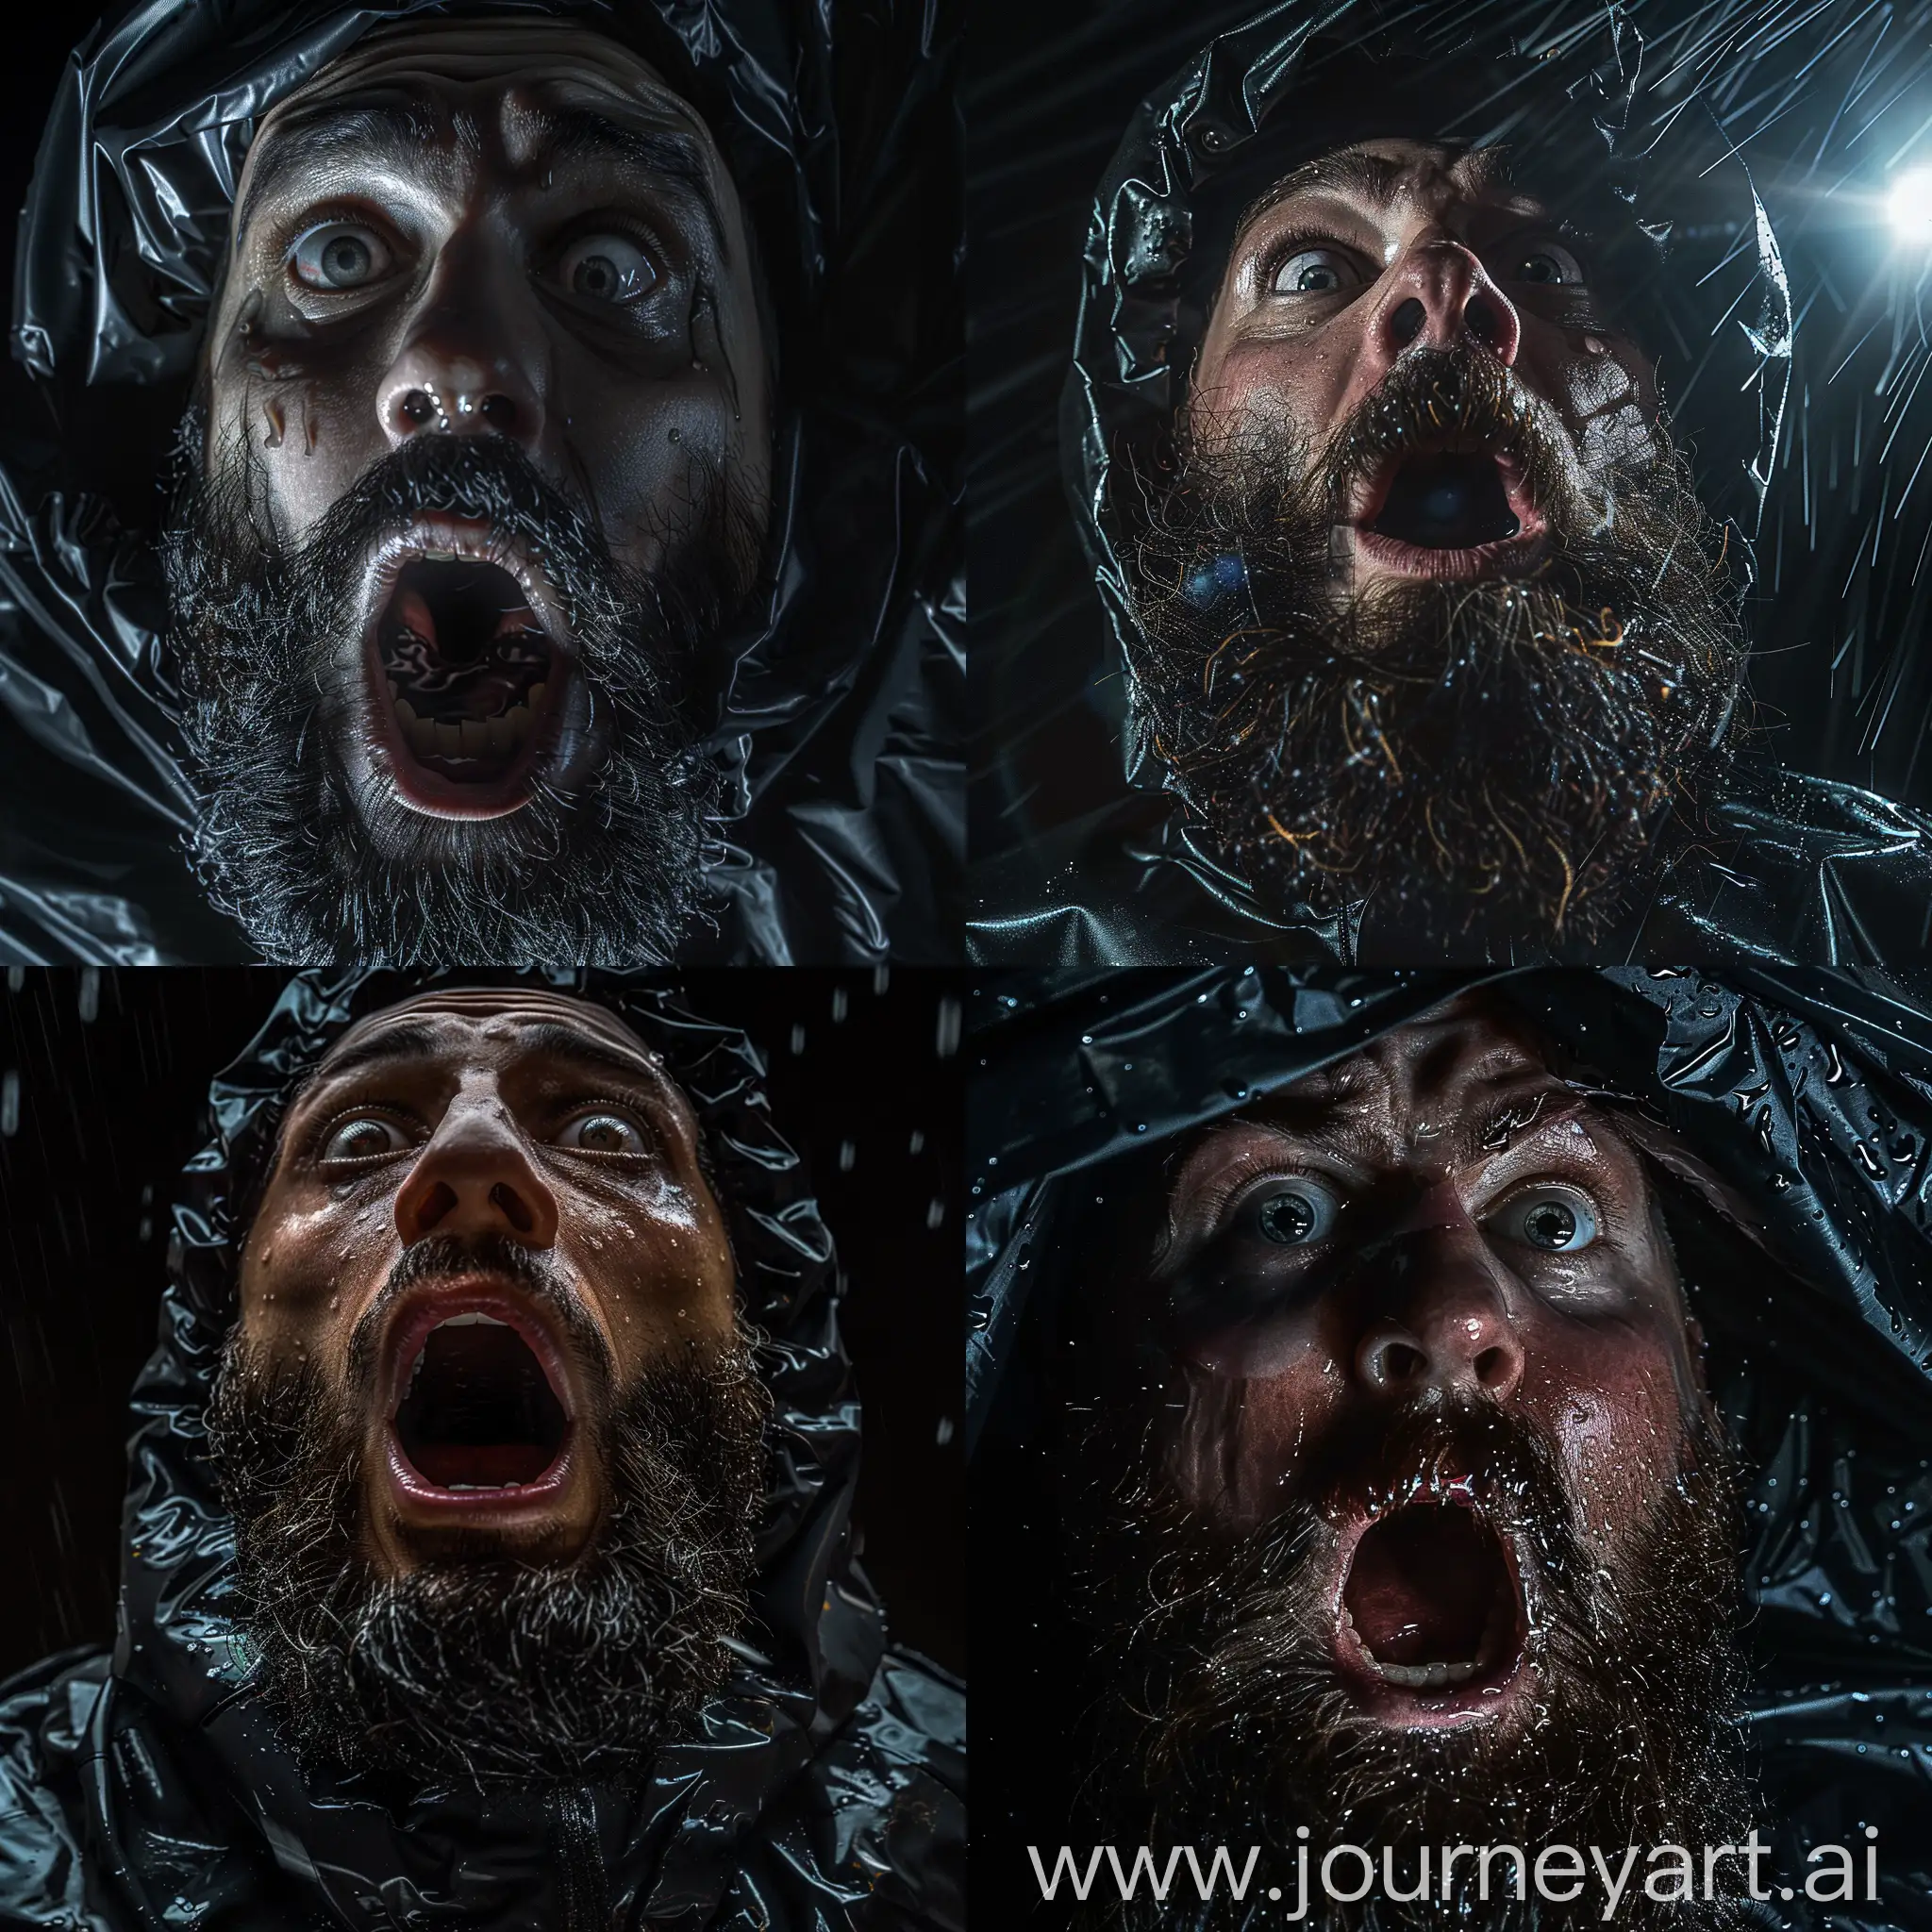 detail shot of a bearded man's face, black raincoat, panic, paralyzed, hypnotized eyes, open mouth, intrinsic detail, macro photography, focused eye lighting, flashing light, low angle DSLR, RAW photo, HDR, hyper-realistic, cinematic lighting, noir, photo realism, christopher mckenney style